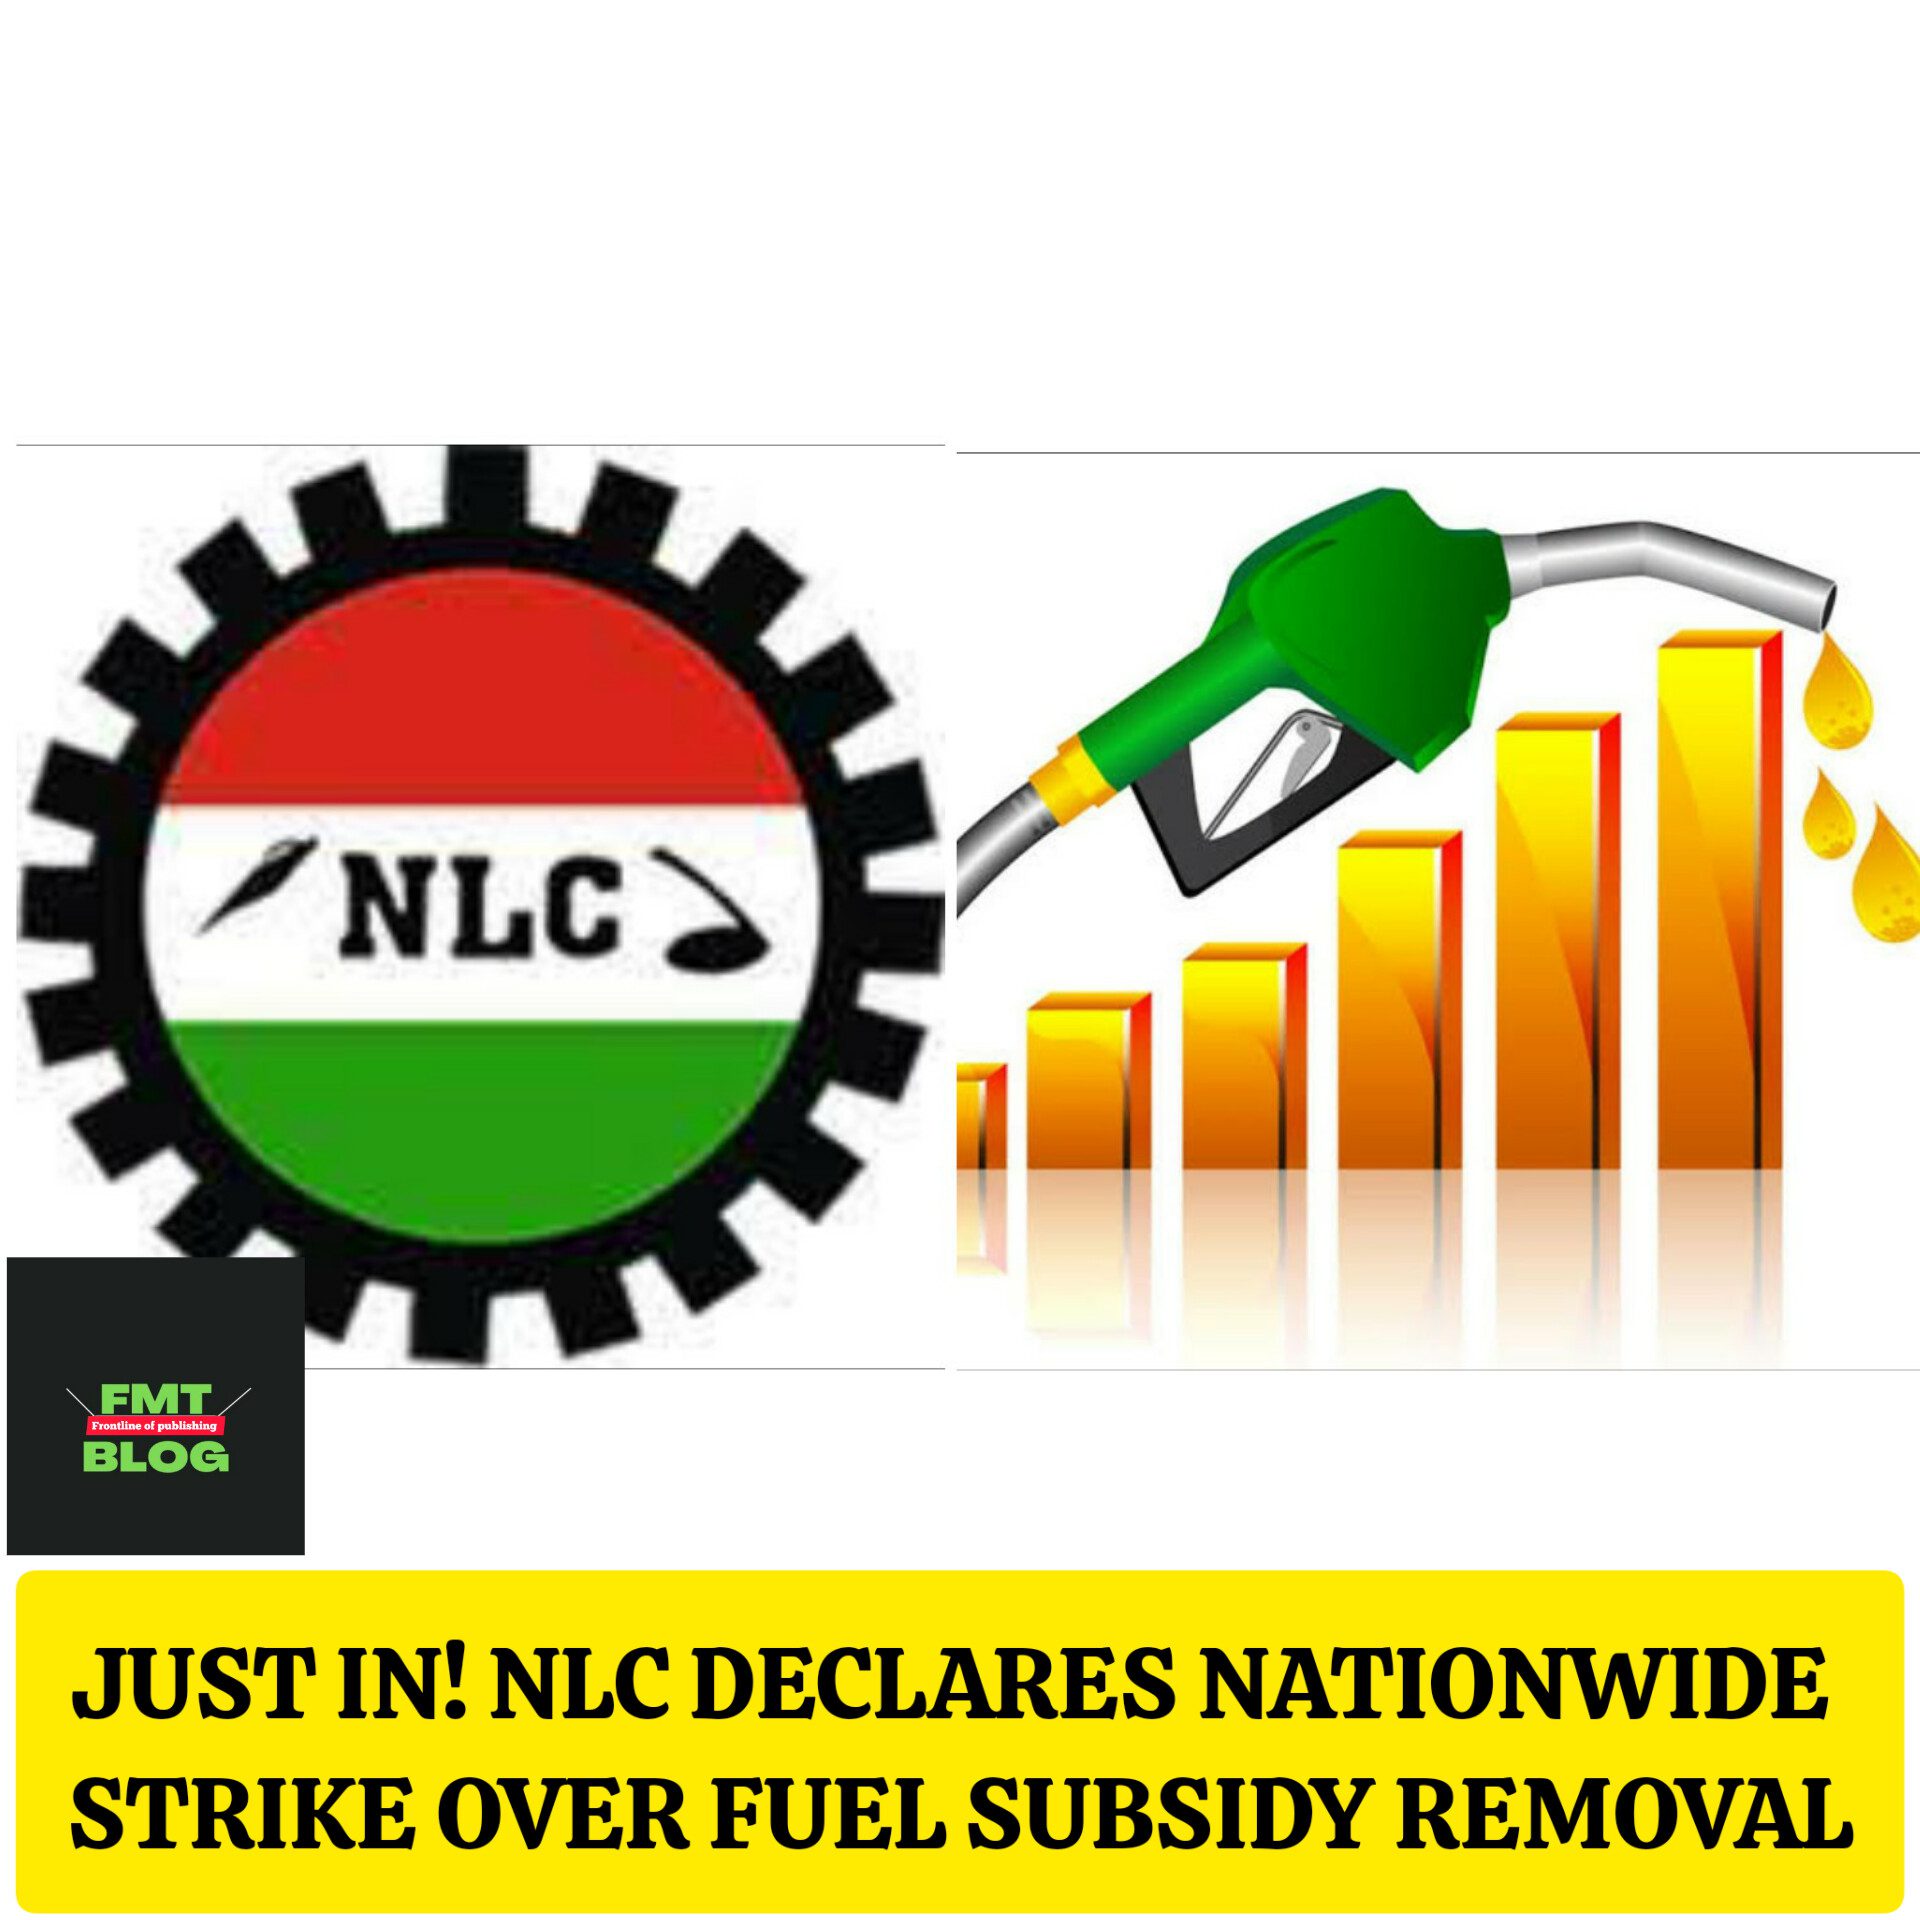 JUST IN! NLC Declares Nationwide Strike over Fuel Subsidy Removal